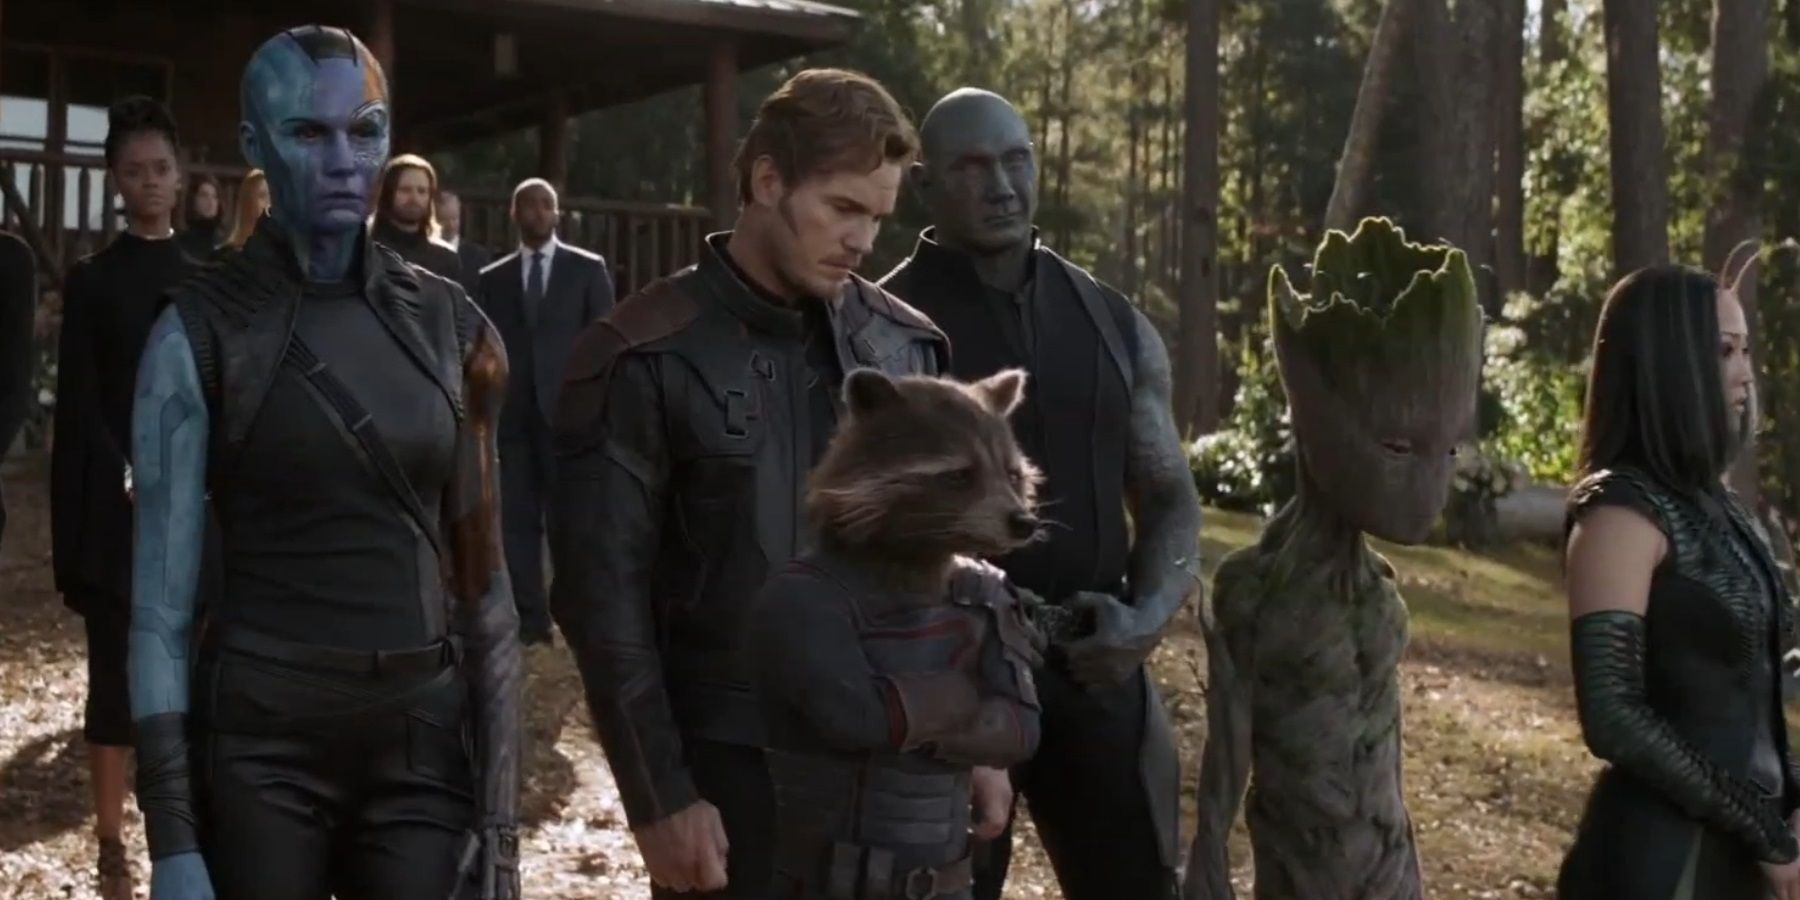 The Guardians of the Galaxy at Tony Stark's funeral in Avengers Endgame